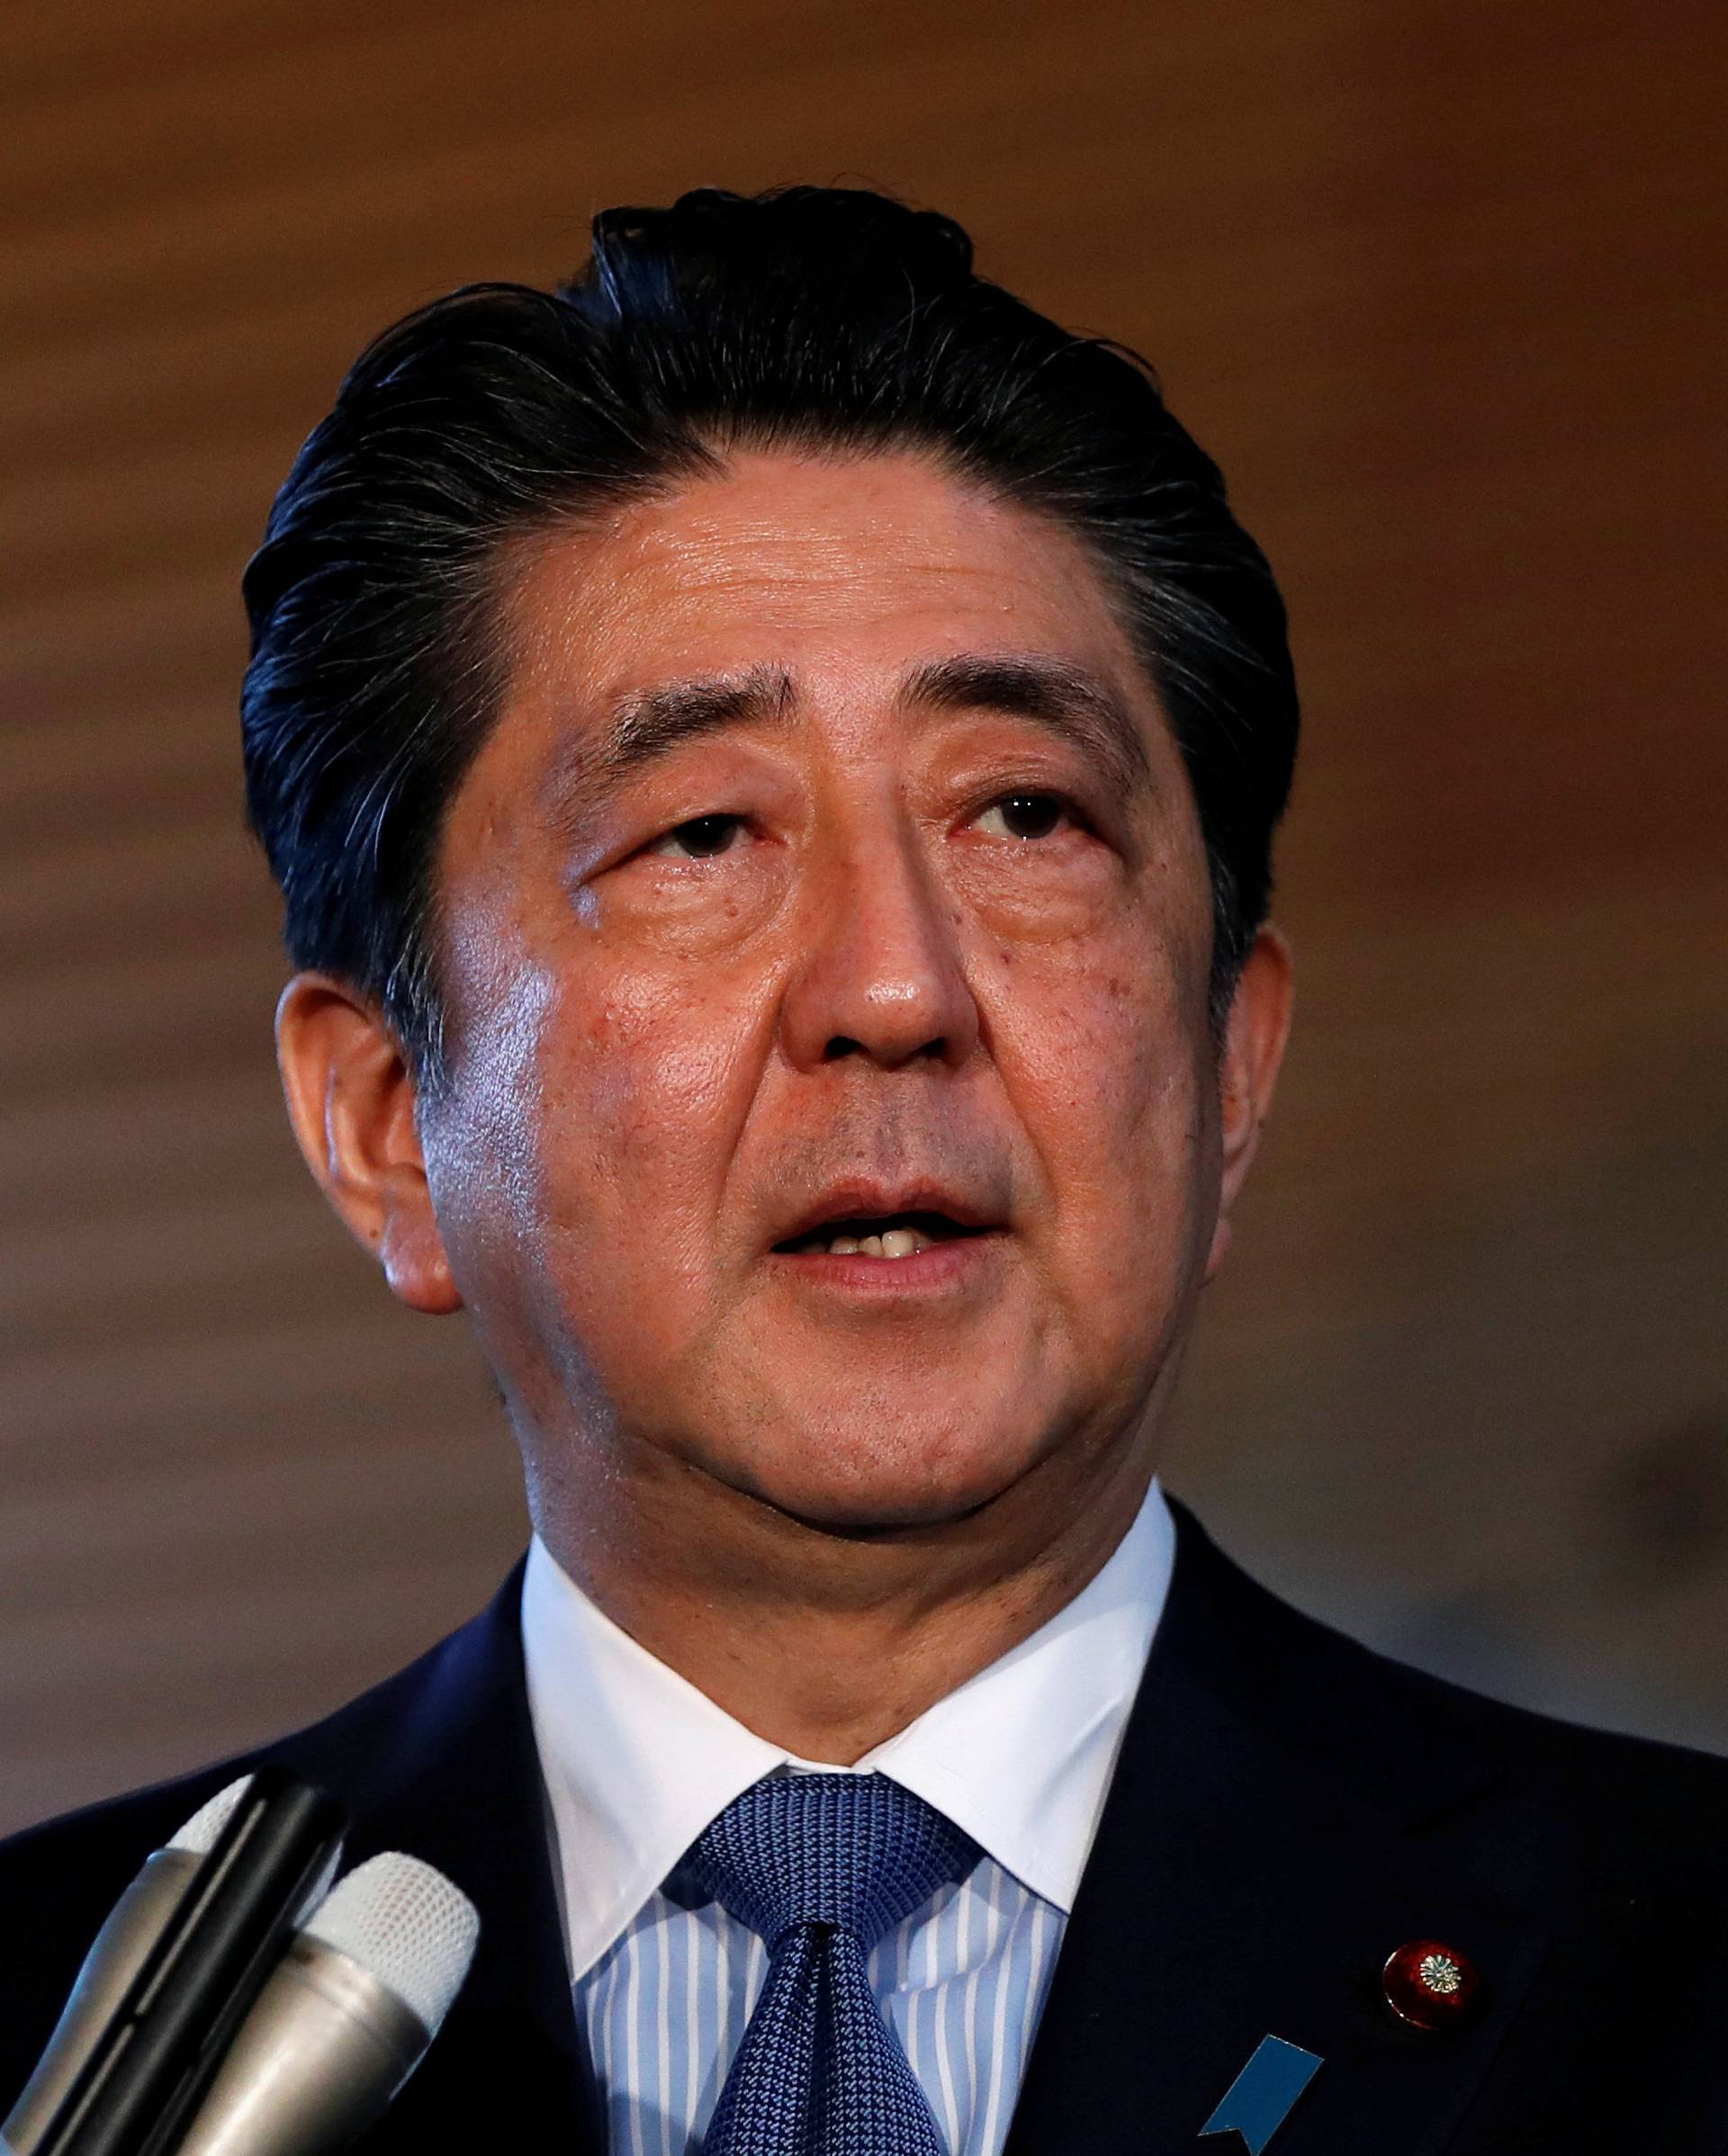 Japan's Prime Minister Shinzo Abe speaks to media after the news conference by the U.S. President Donald Trump, after the summit between the U.S. and North Korea, in Tokyo